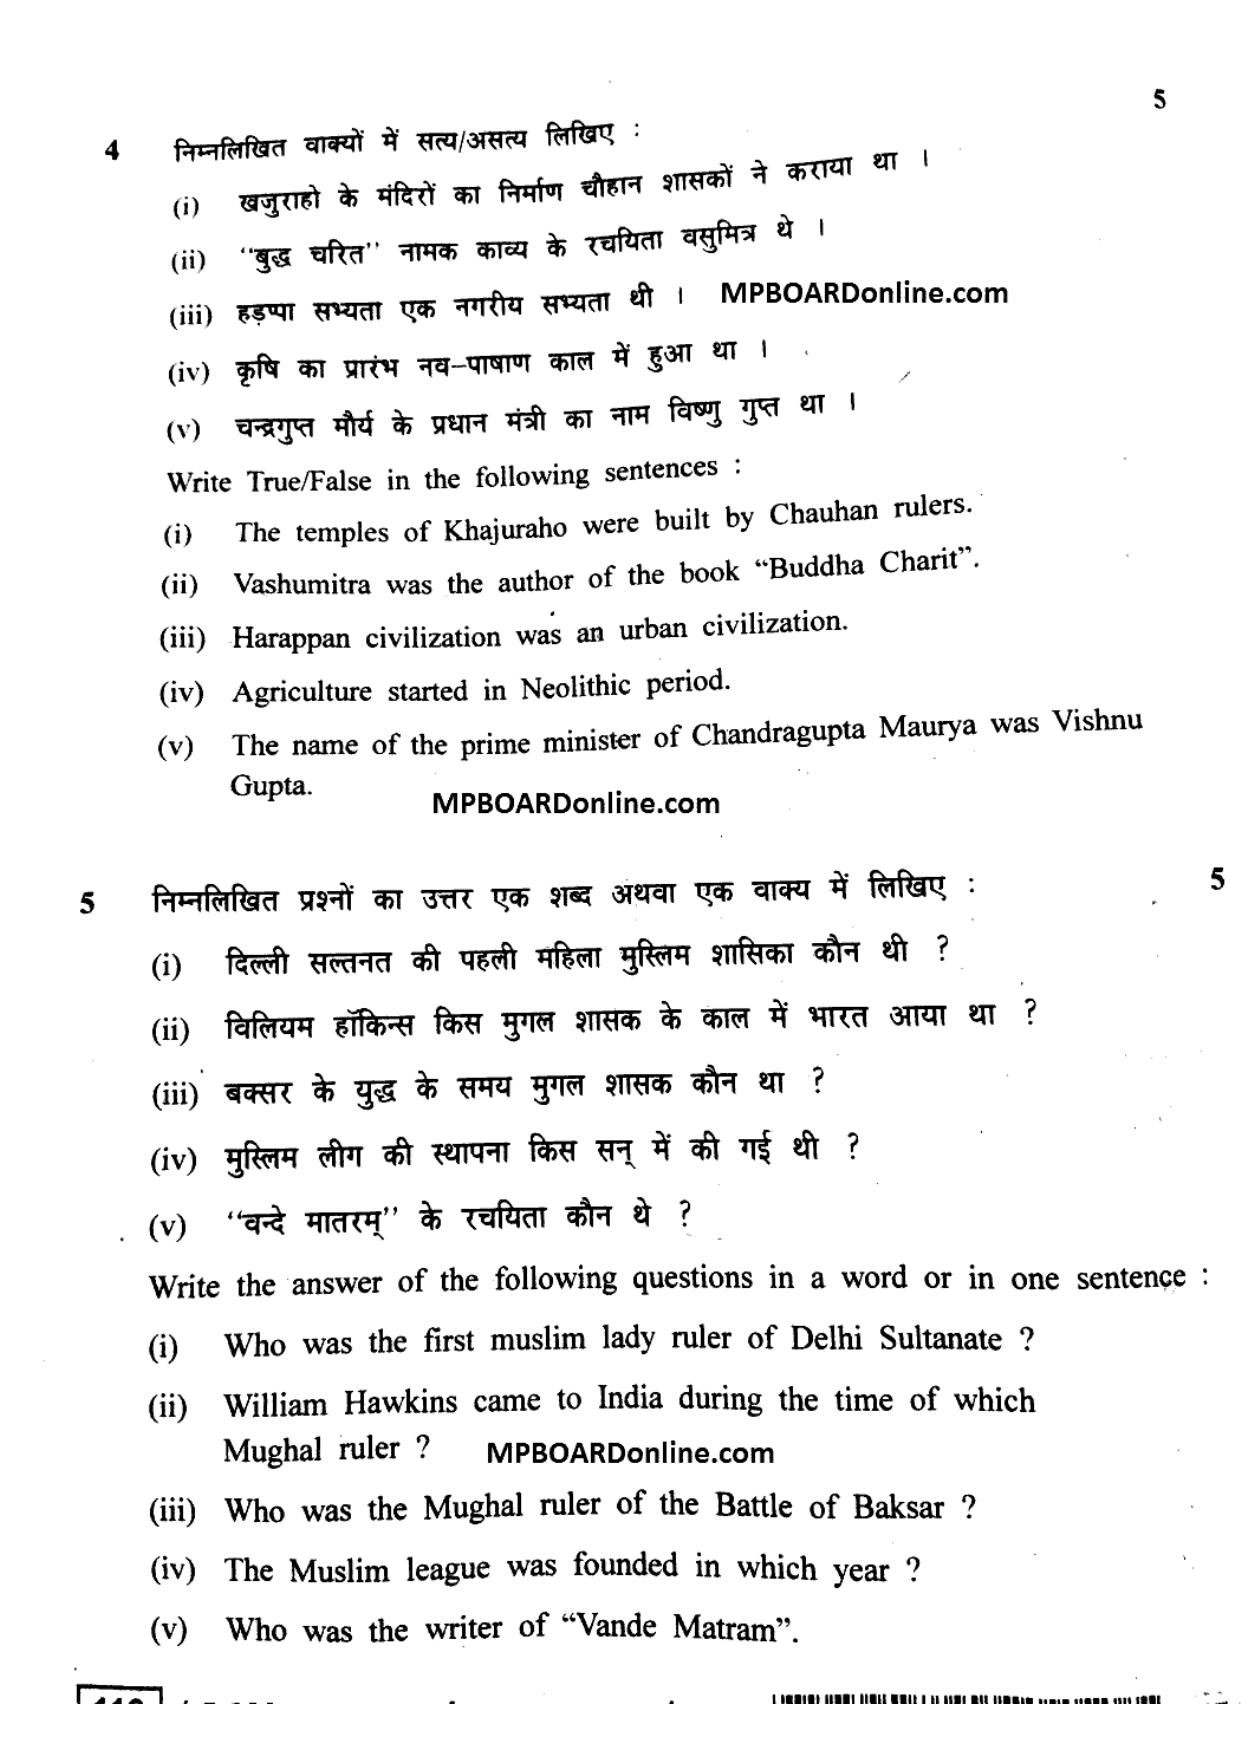 MP Board Class 12 History 2018 Question Paper - Page 4